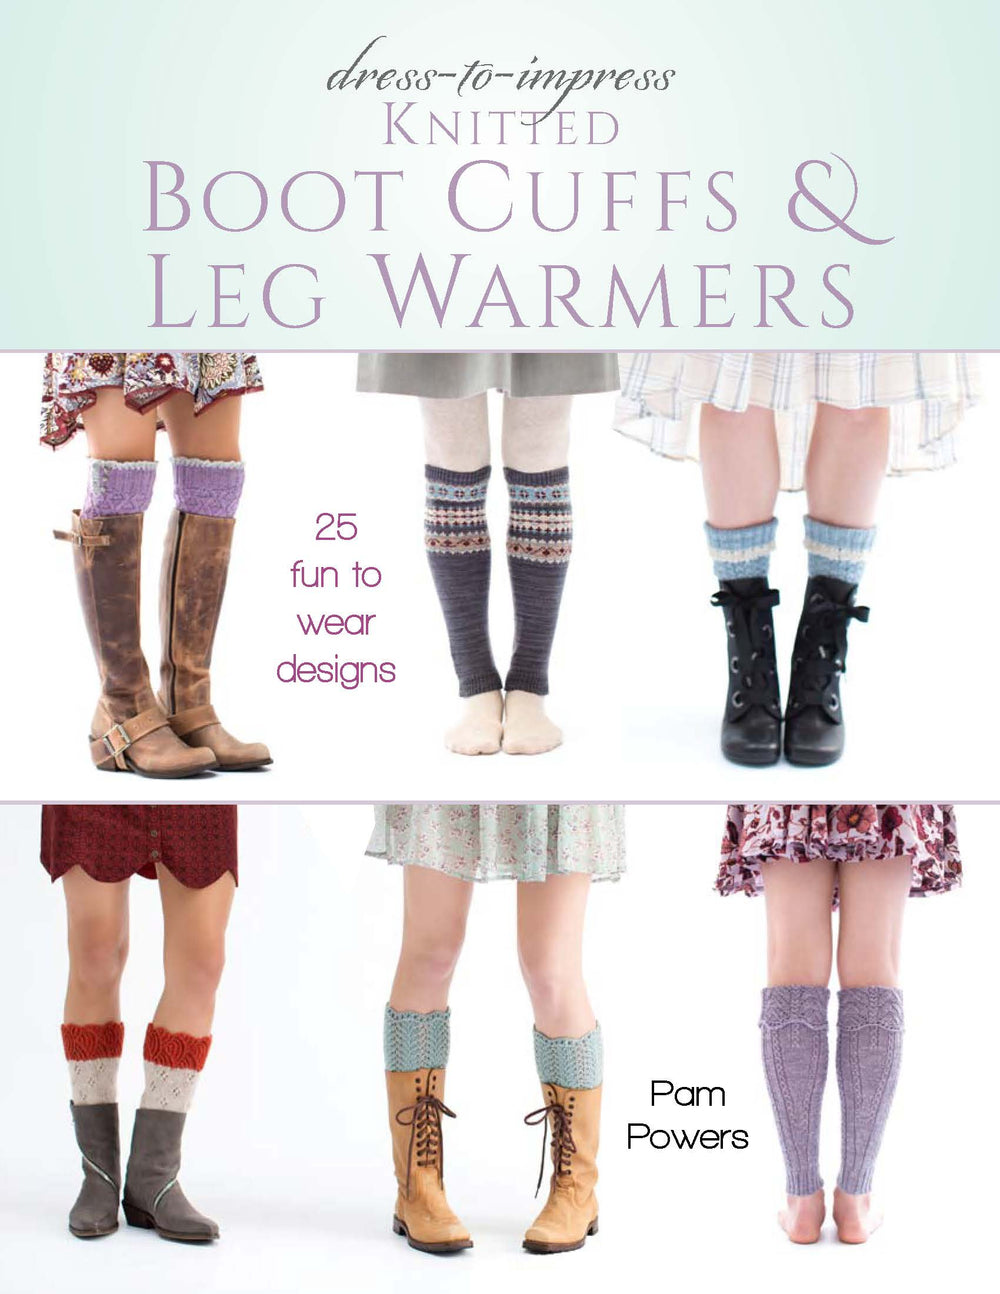 How To Wear Leg Warmers - Read This First